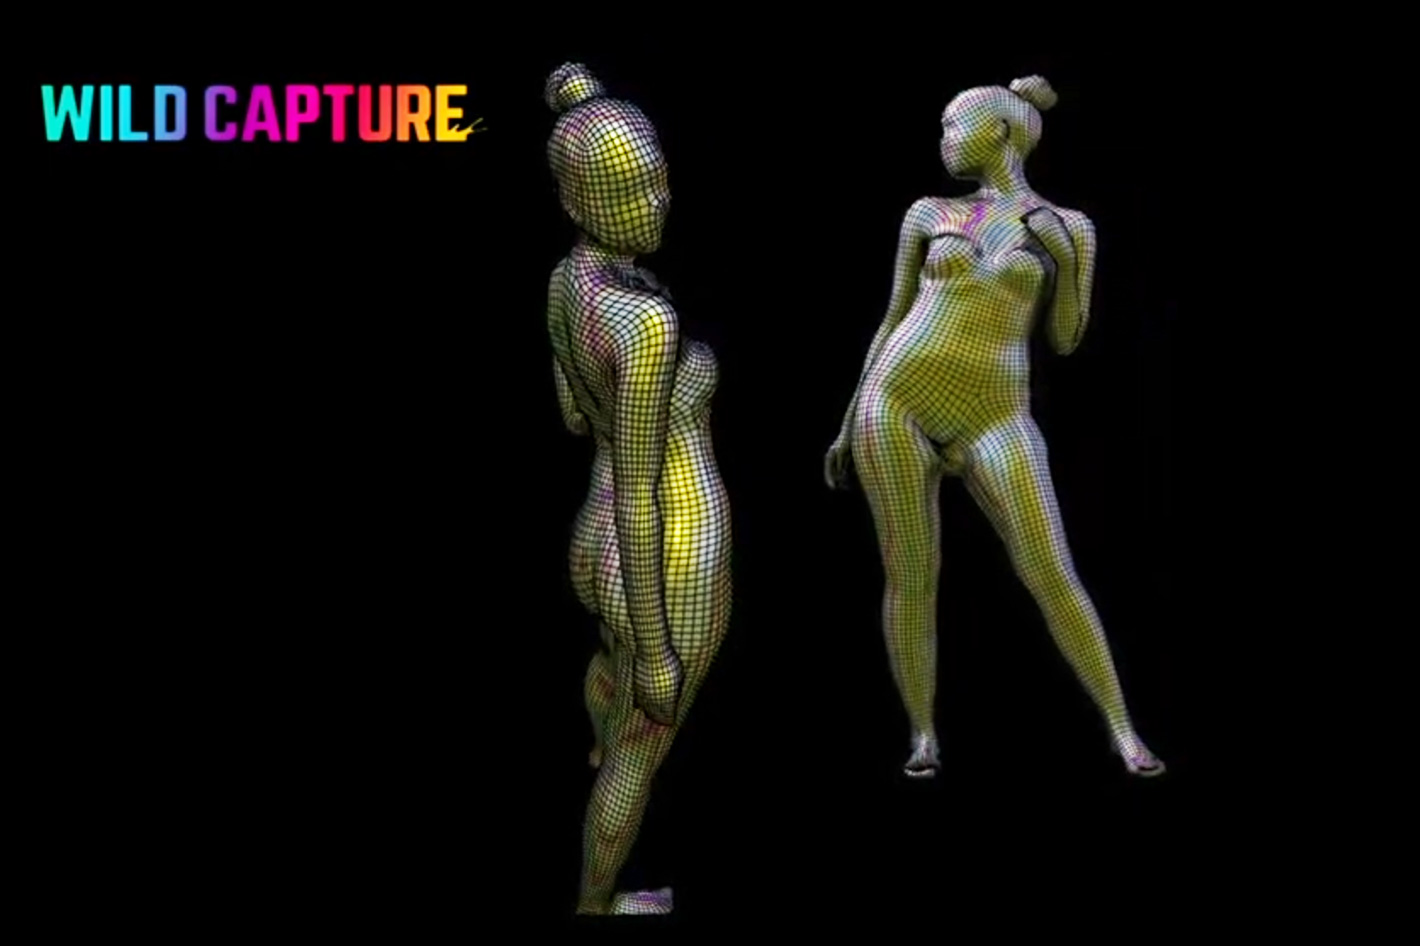 Wild Capture to show Digital Humans technology at SIGGRAPH 2022